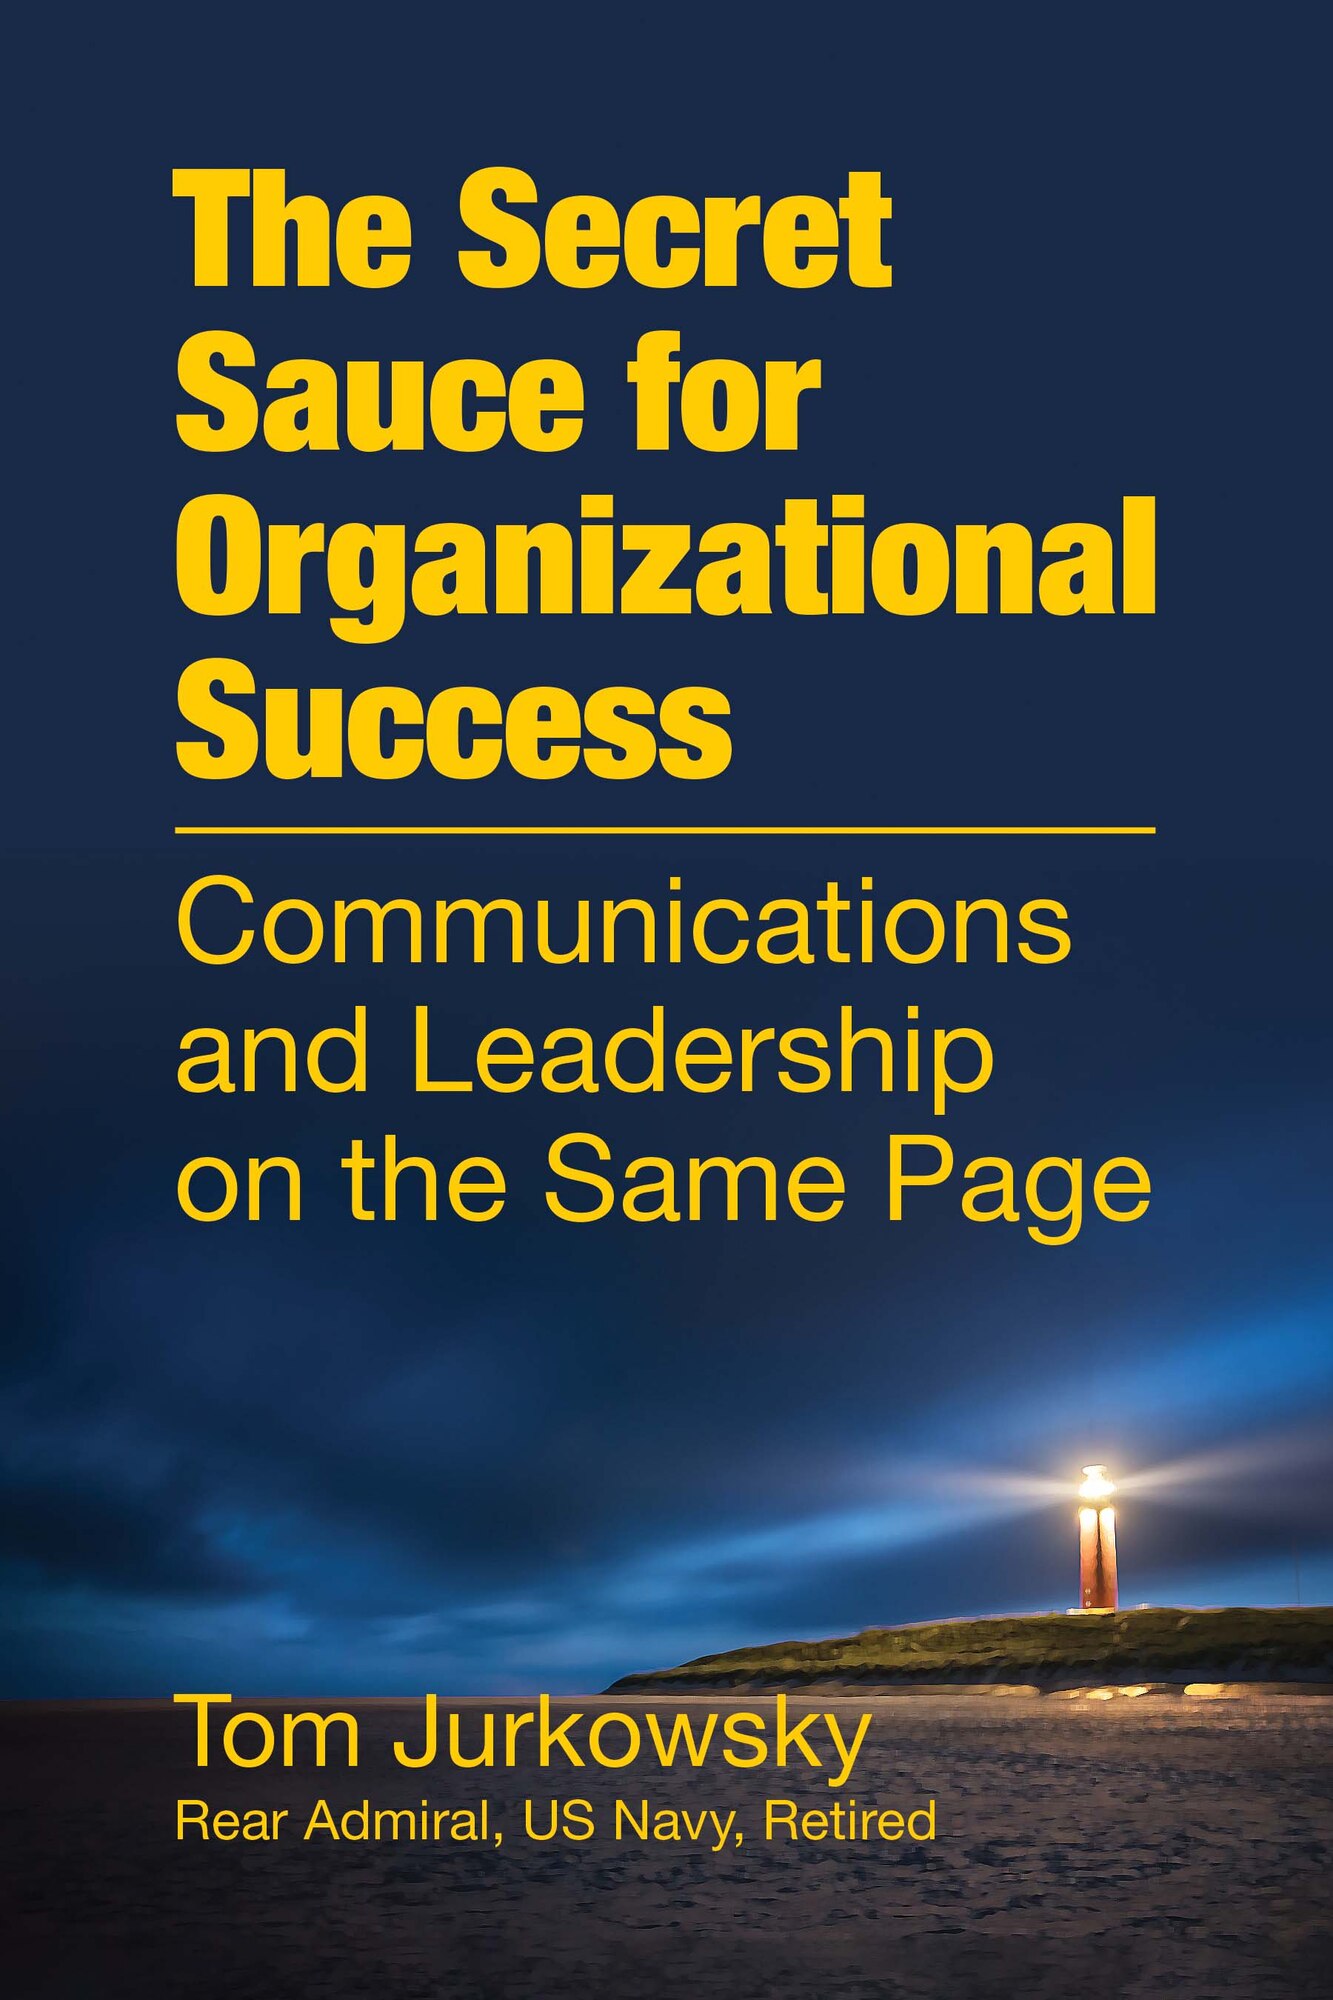 Air University Press’s latest book release is The Secret Sauce for Organizational Success: Communications and Leadership on the Same Page by retired Navy Rear Adm. Tom Jurkowsky. (Courtesy graphic)